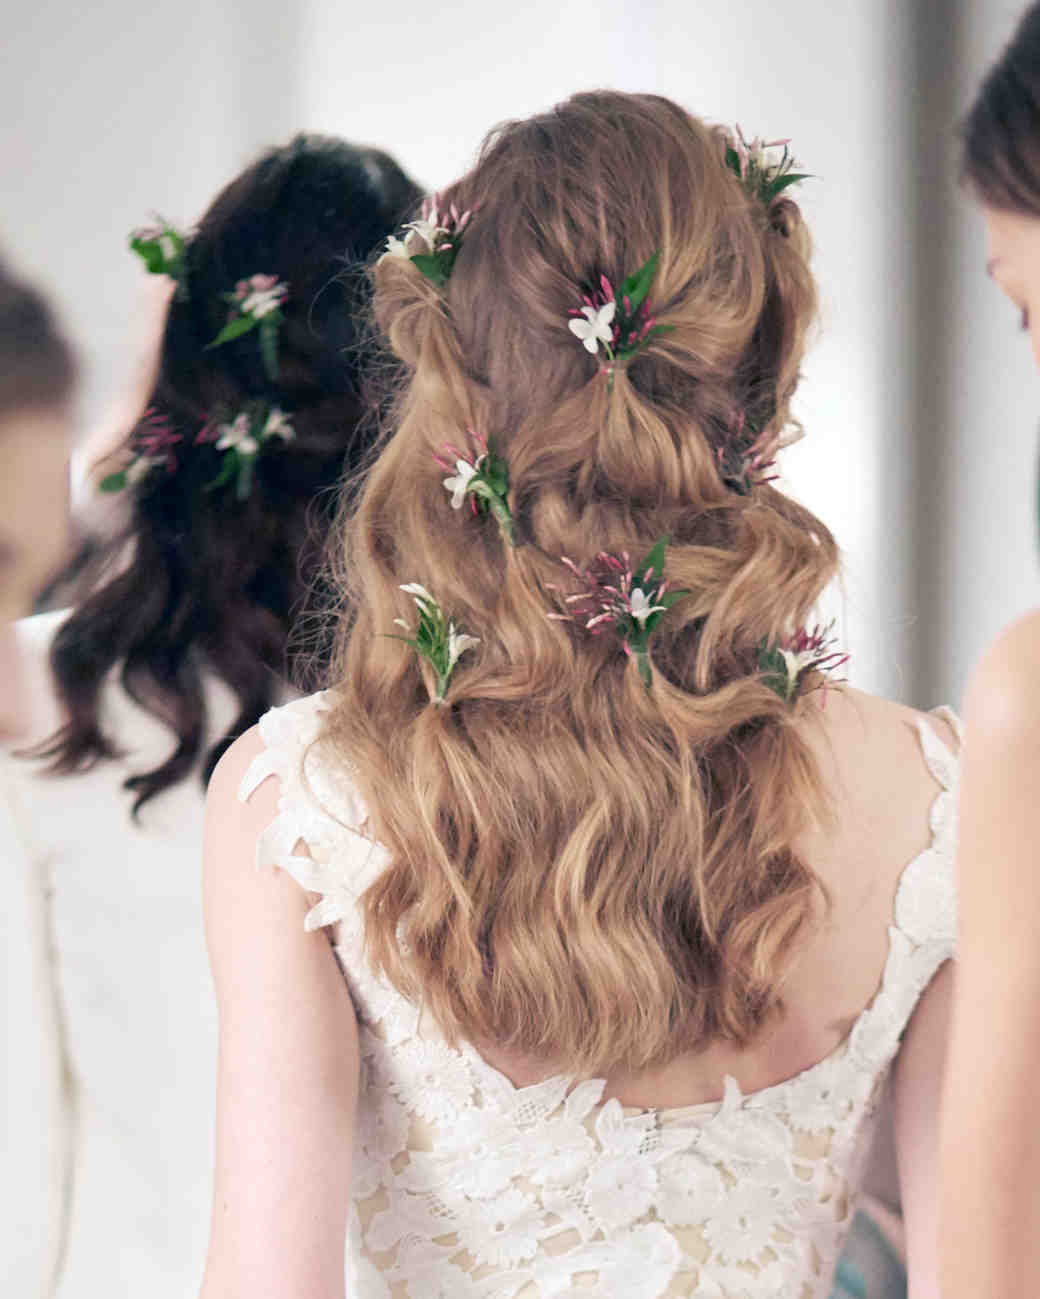 Bridesmaid Long Hairstyles
 96 Fun Facts About Your Favorite Bridal Designers